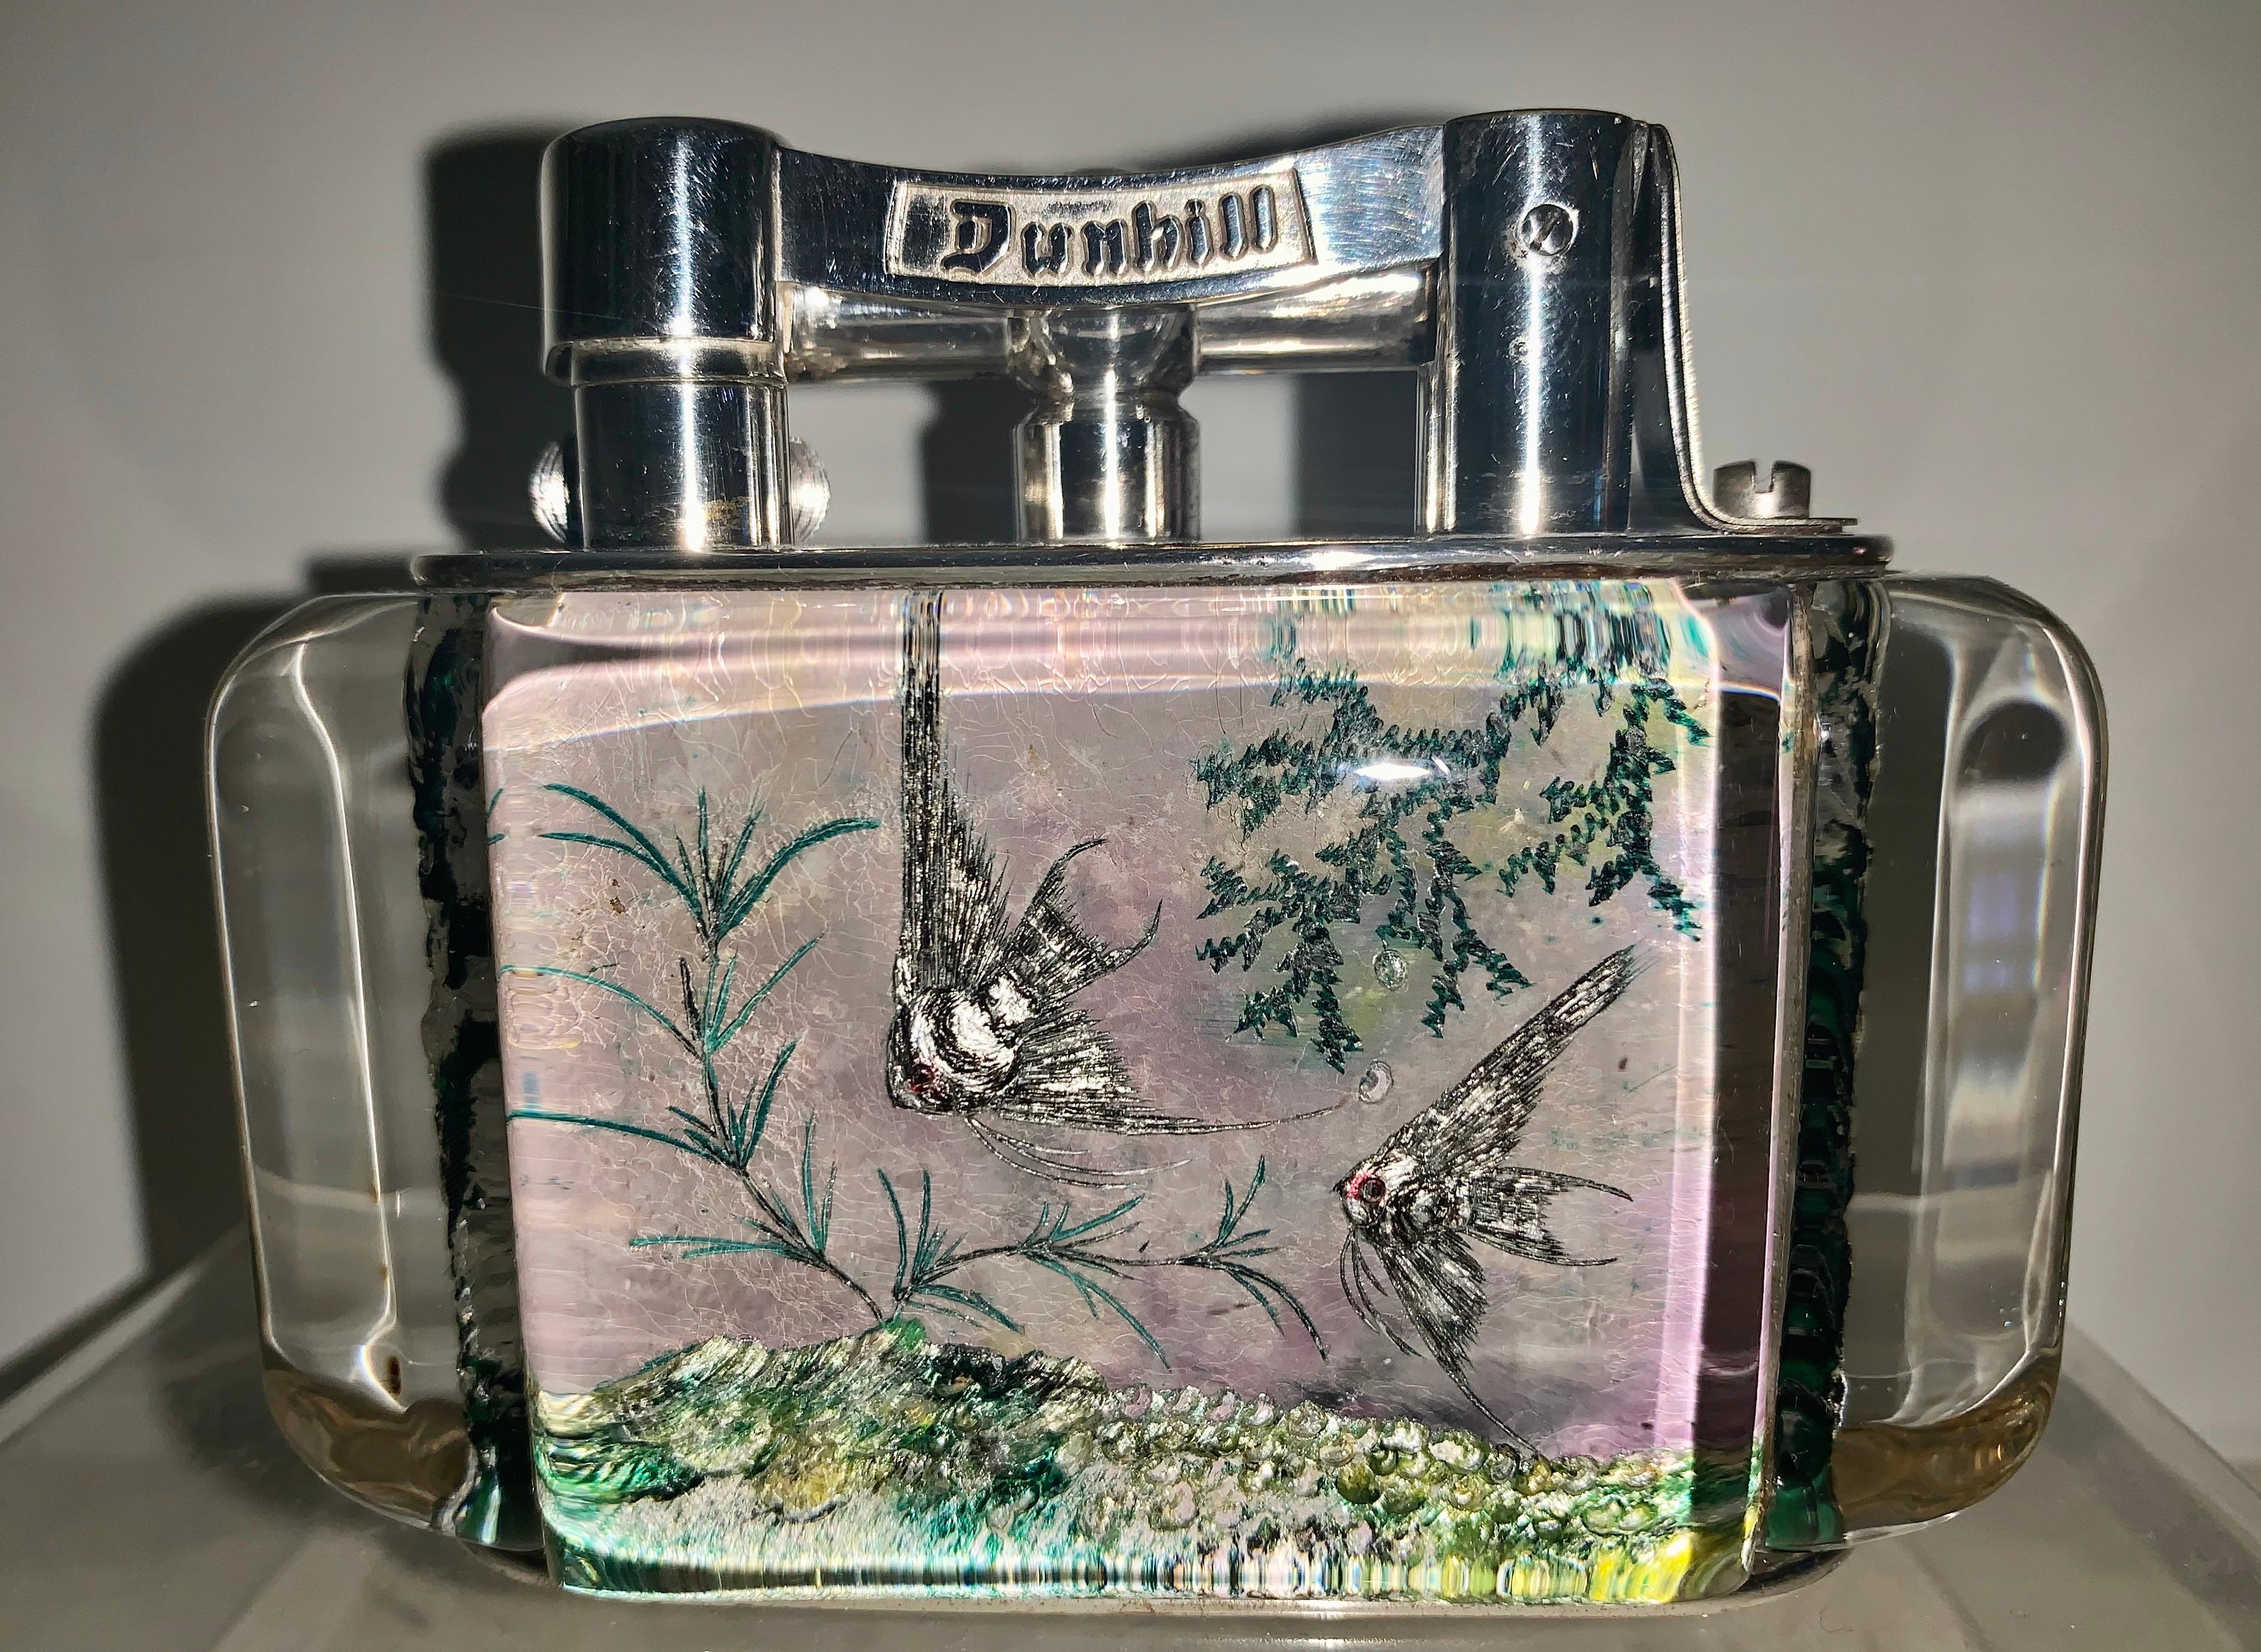 An extremely rare silver plated Dunhill Aquarium table lighter, Vintage mid-20th century very large 